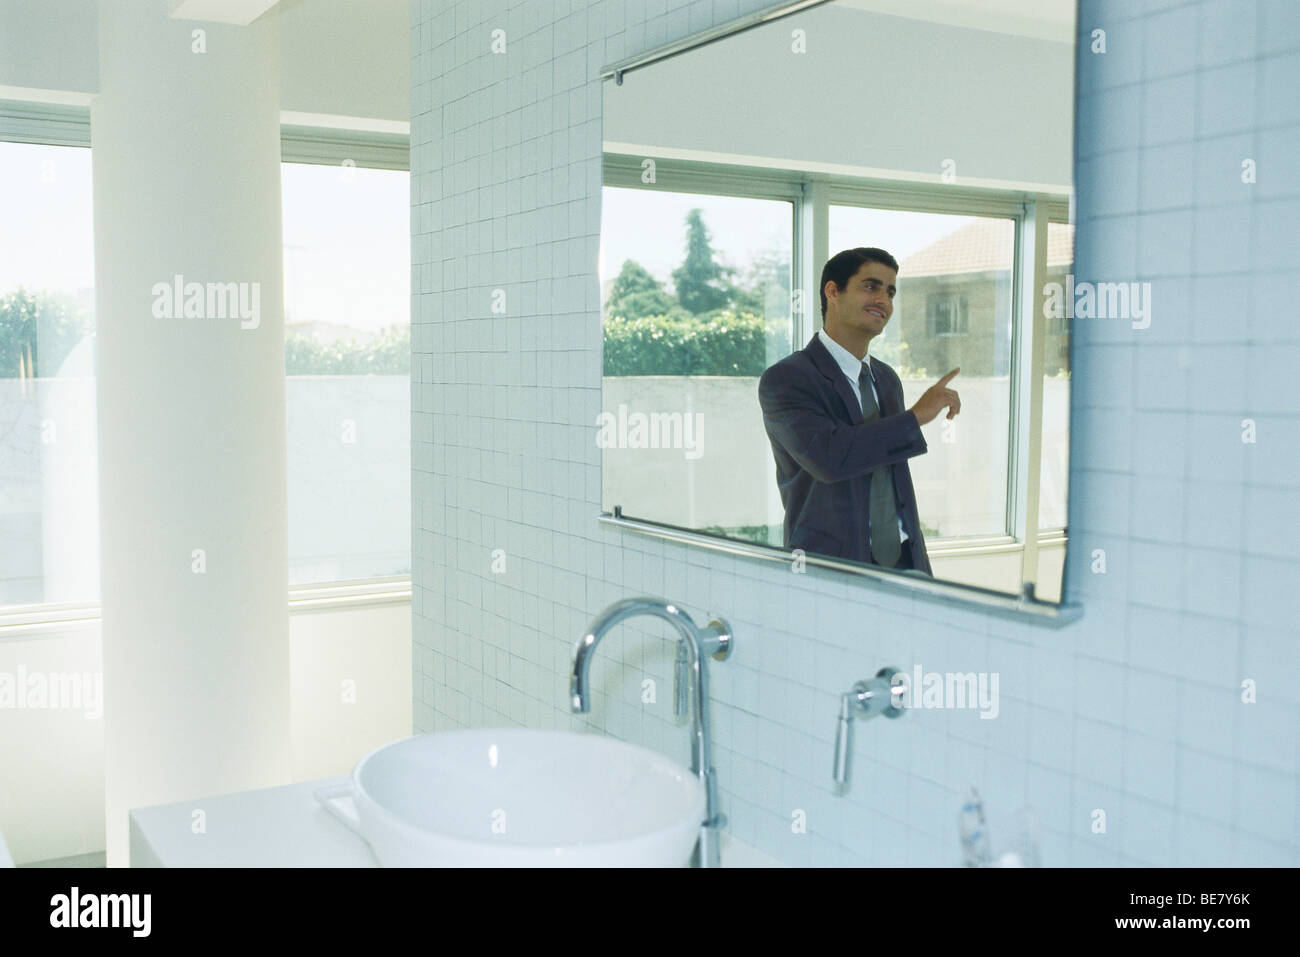 Businessman in bathroom having conversation with person out of frame Stock Photo